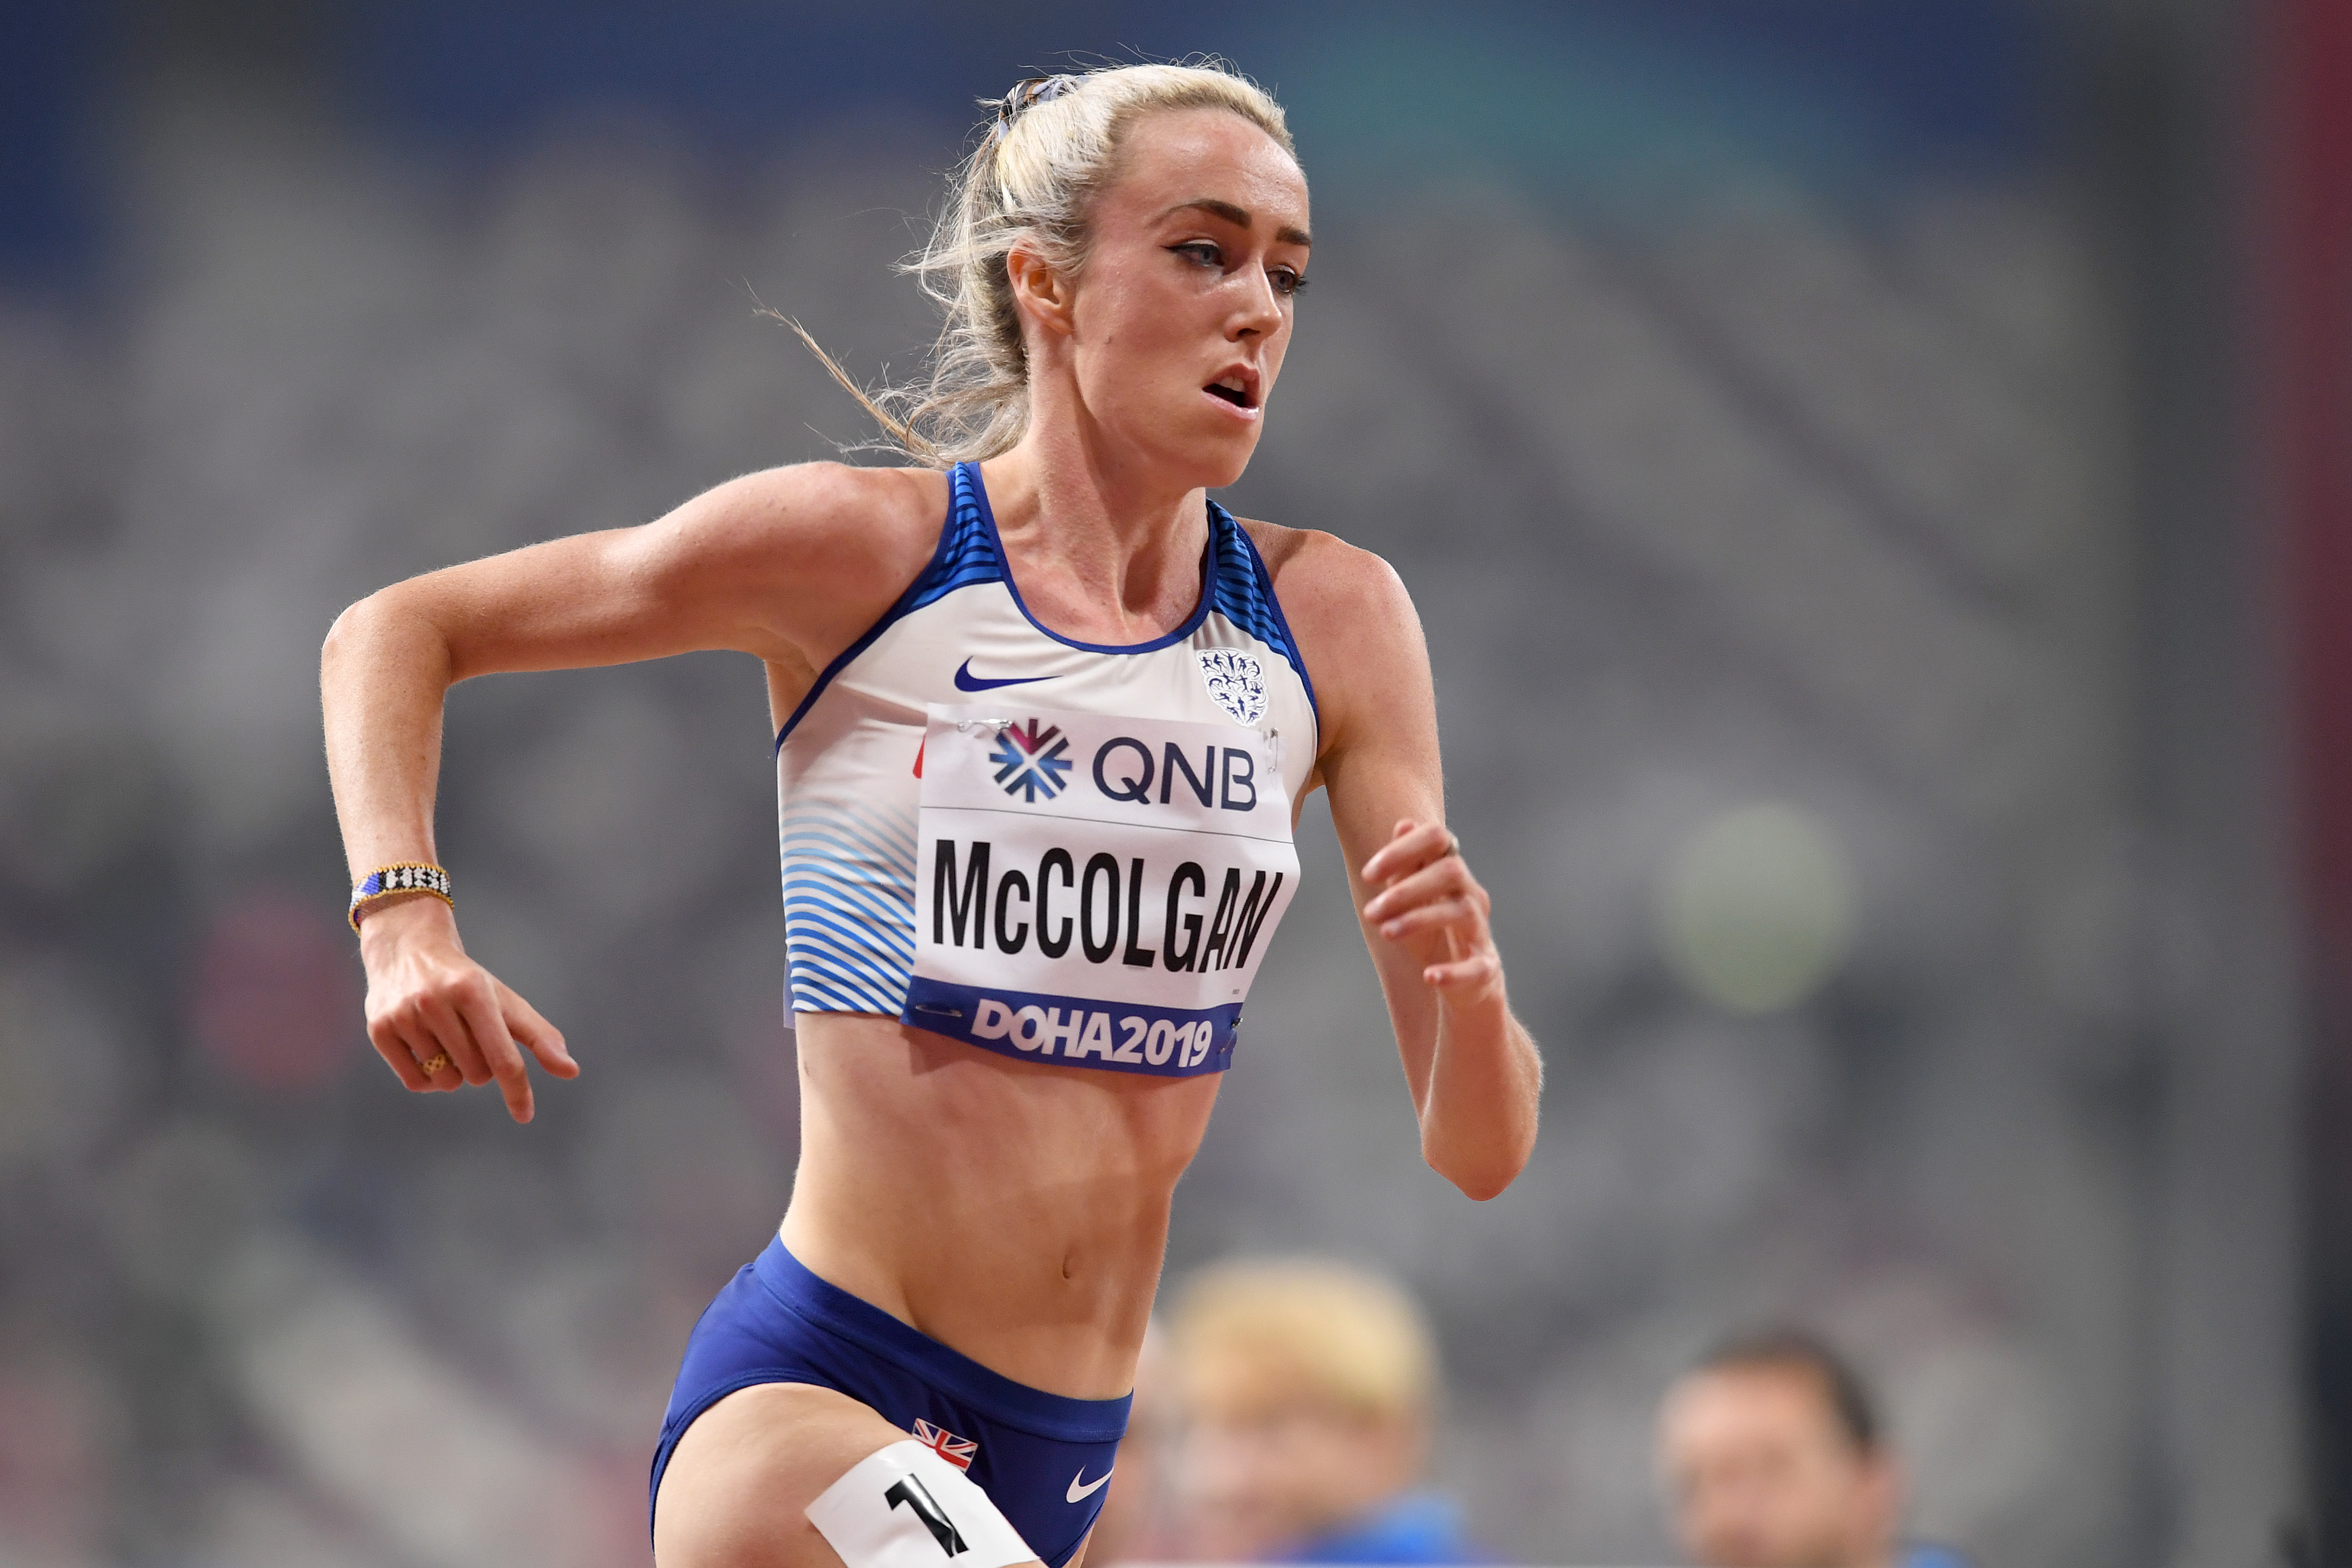 MCCOLGAN AND THOMPSON OUT TO DEFEND GREAT SOUTH RUN TITLES IN PORTSMOUTH